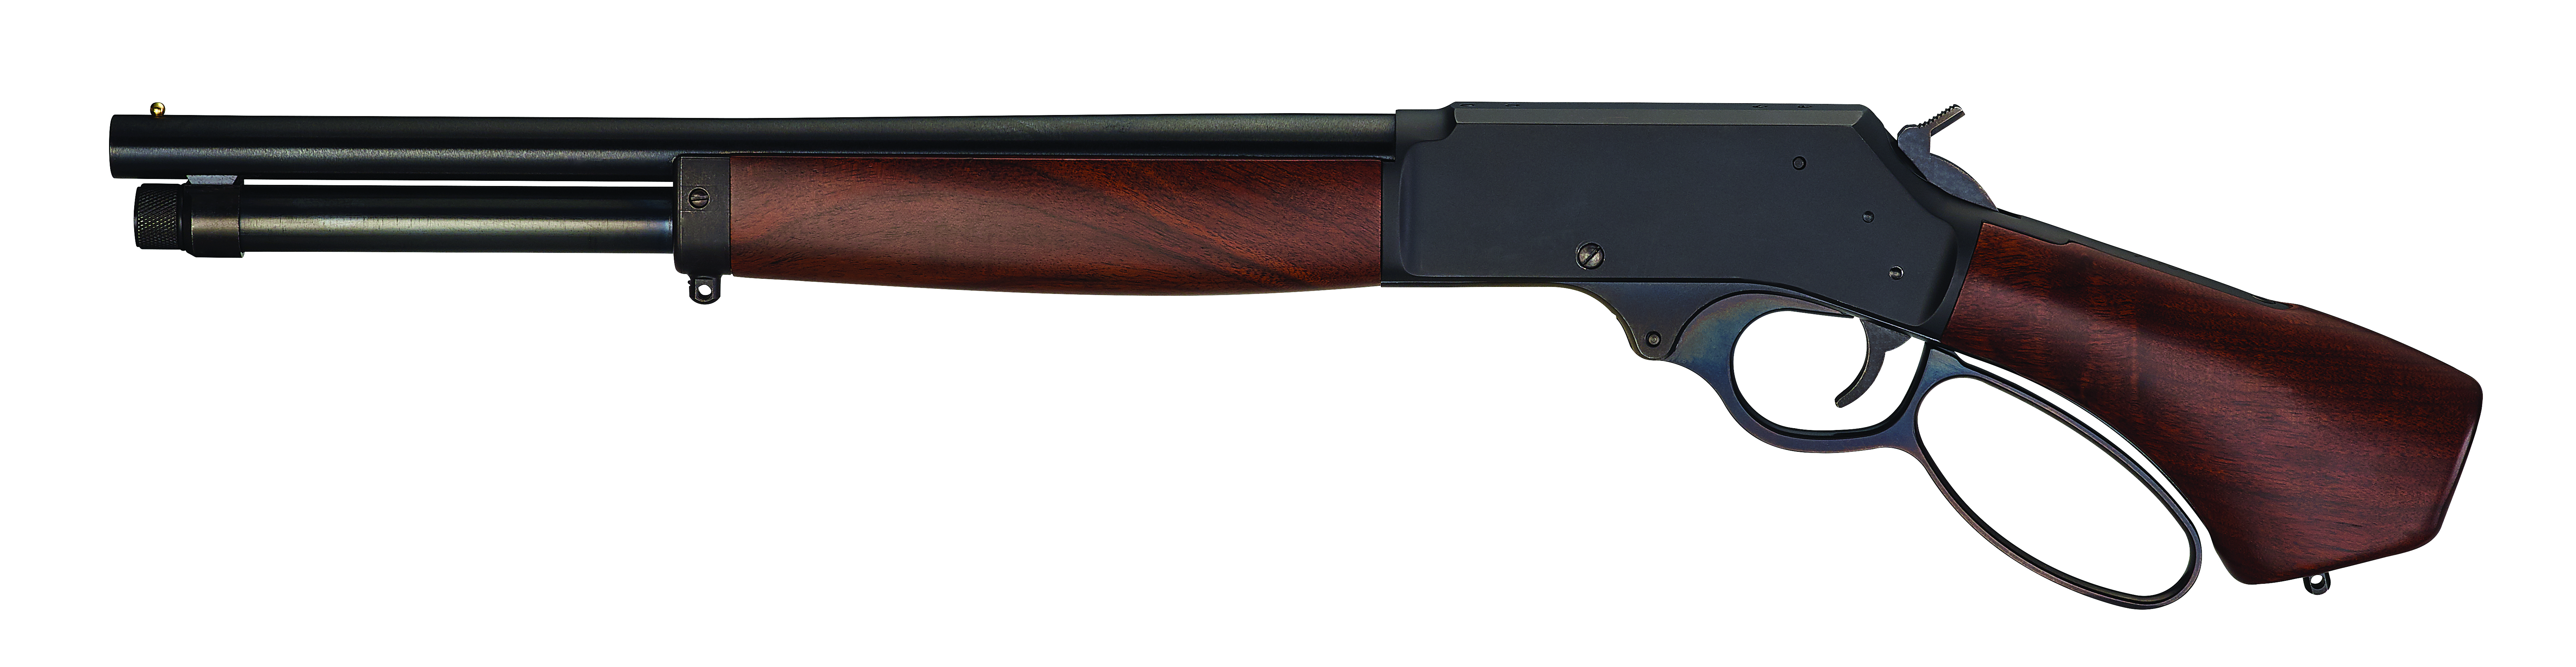 henry-adds-non-nfa-lever-action-axe-410-recoil